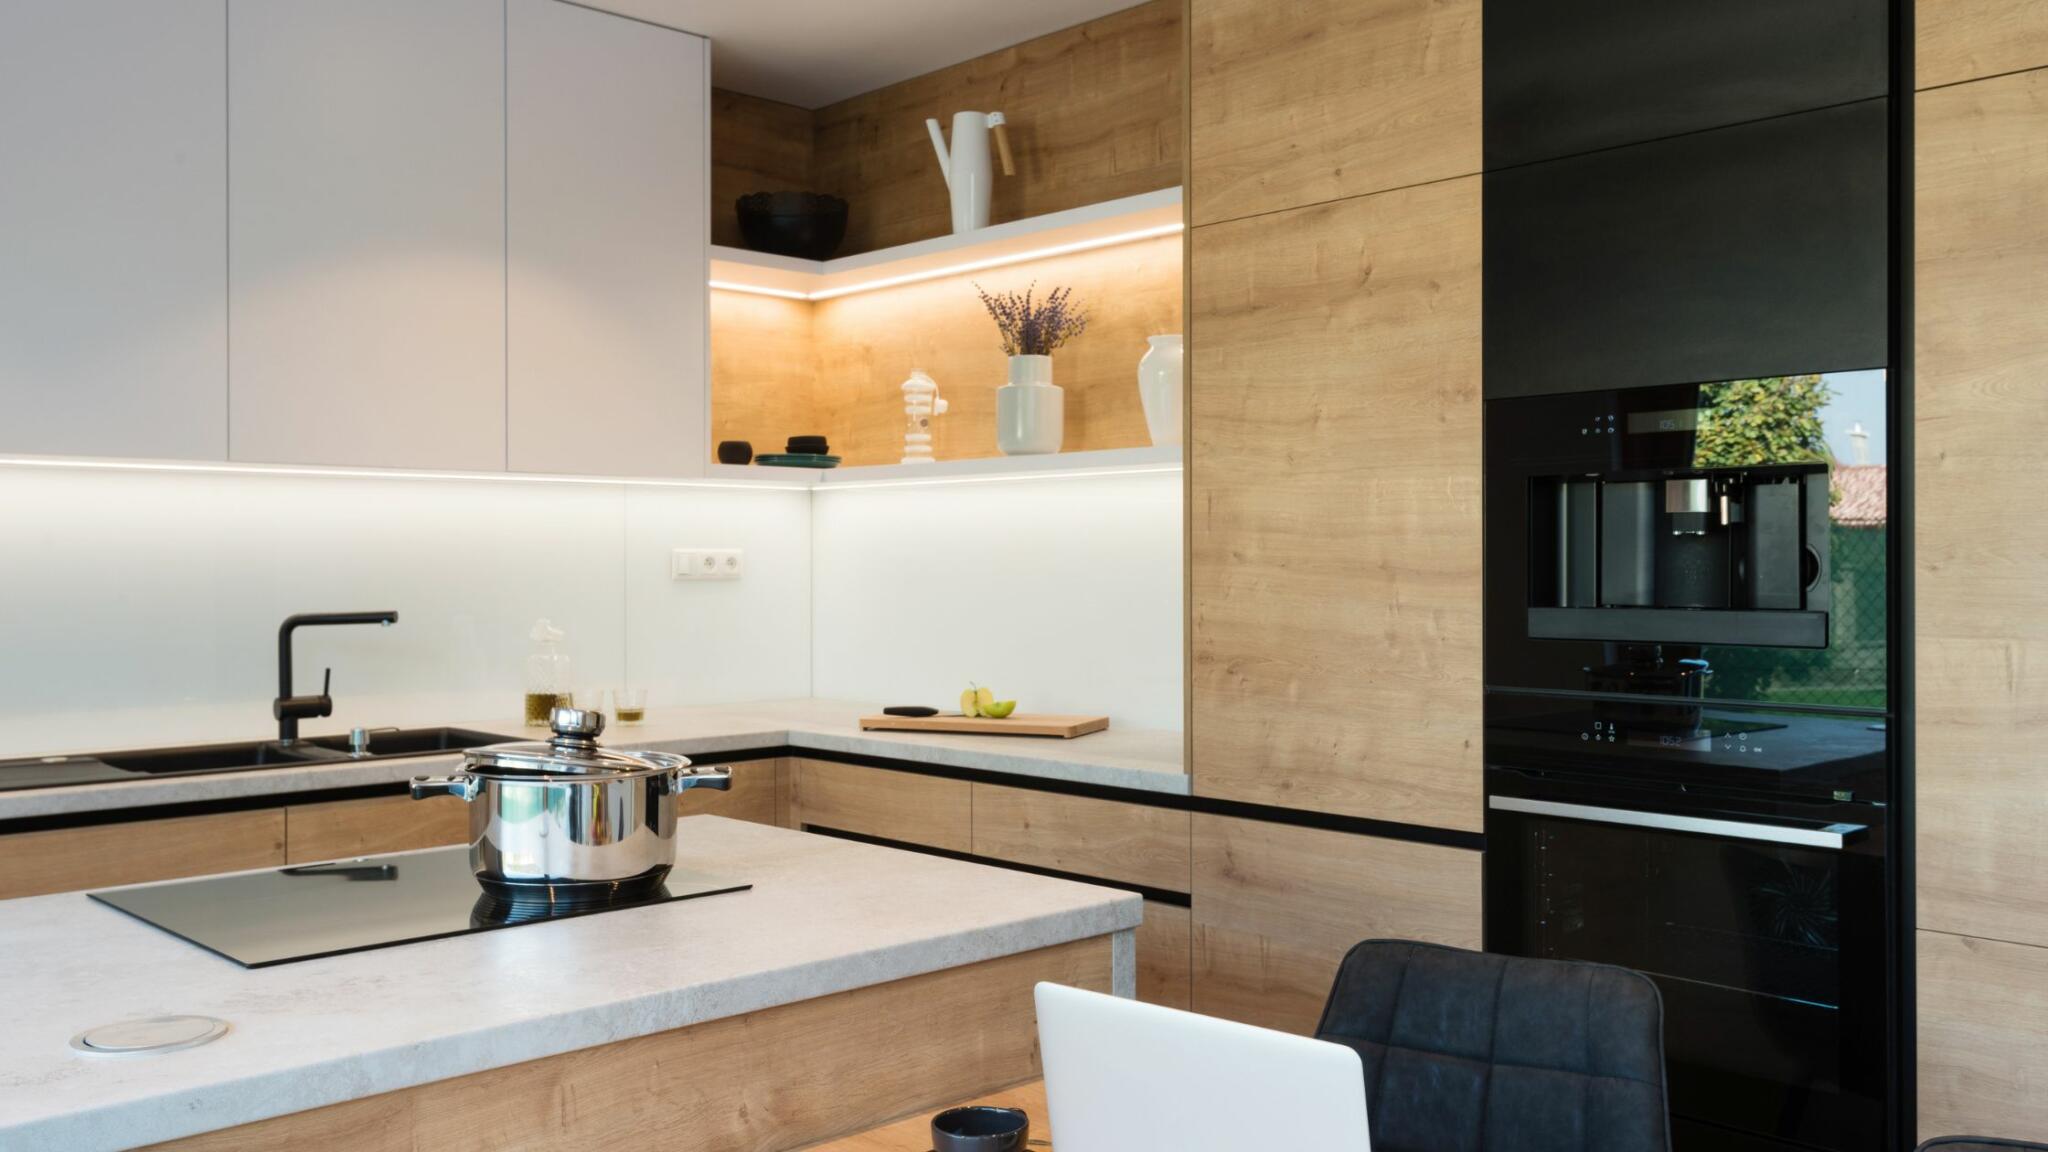 Tips for buying countertops in Seattle